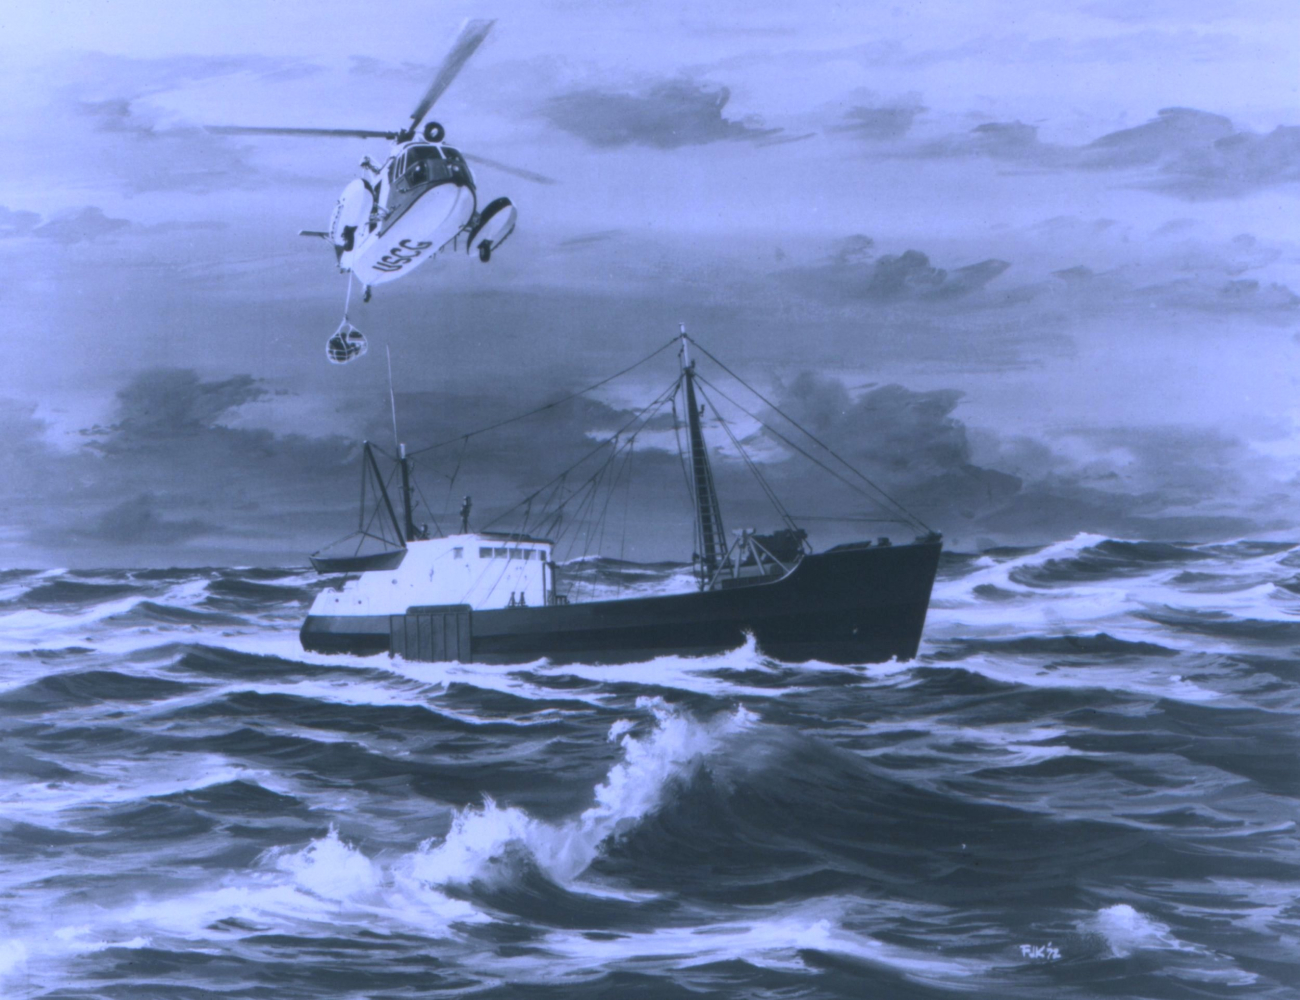 Artist's conception of a successful rescue based on SARSAT